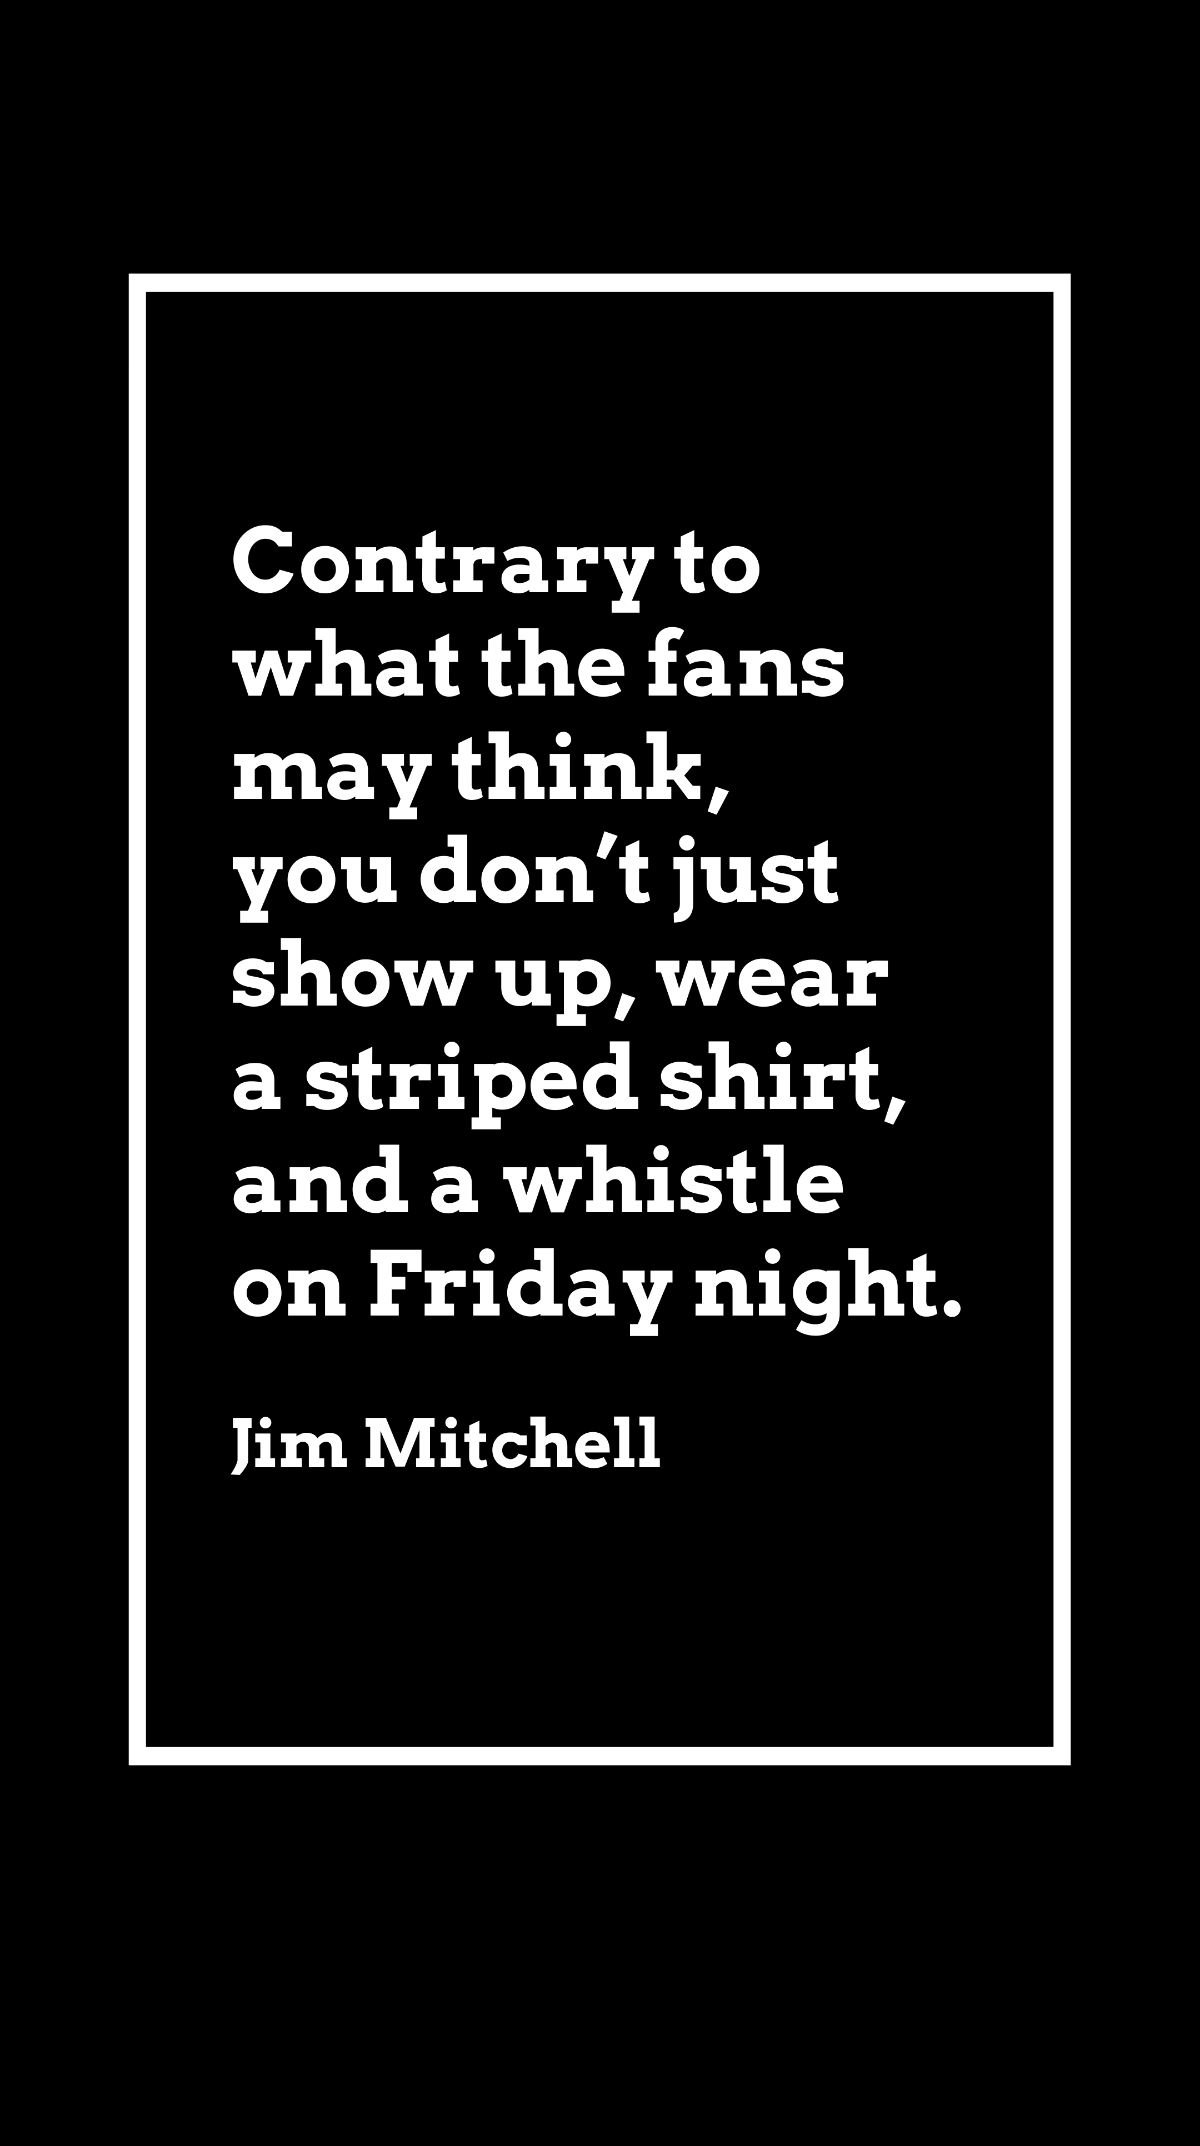 Jim Mitchell - Contrary to what the fans may think, you don’t just show up, wear a striped shirt, and a whistle on Friday night.  Template